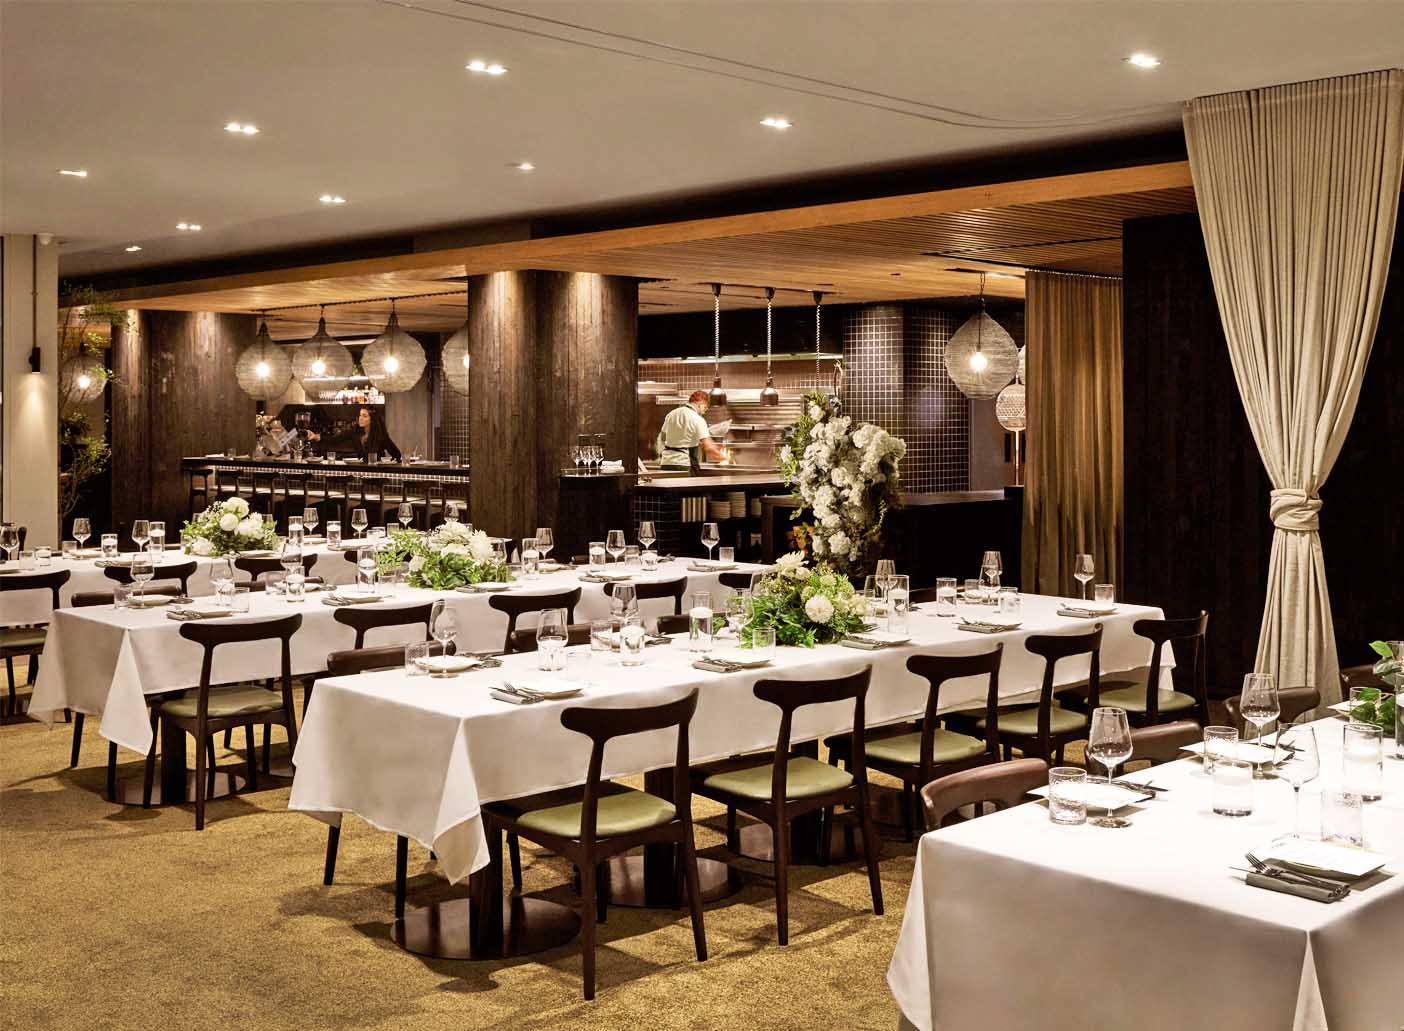 Victoria by Farmer’s Daughter <br> Gorgeous Restaurants